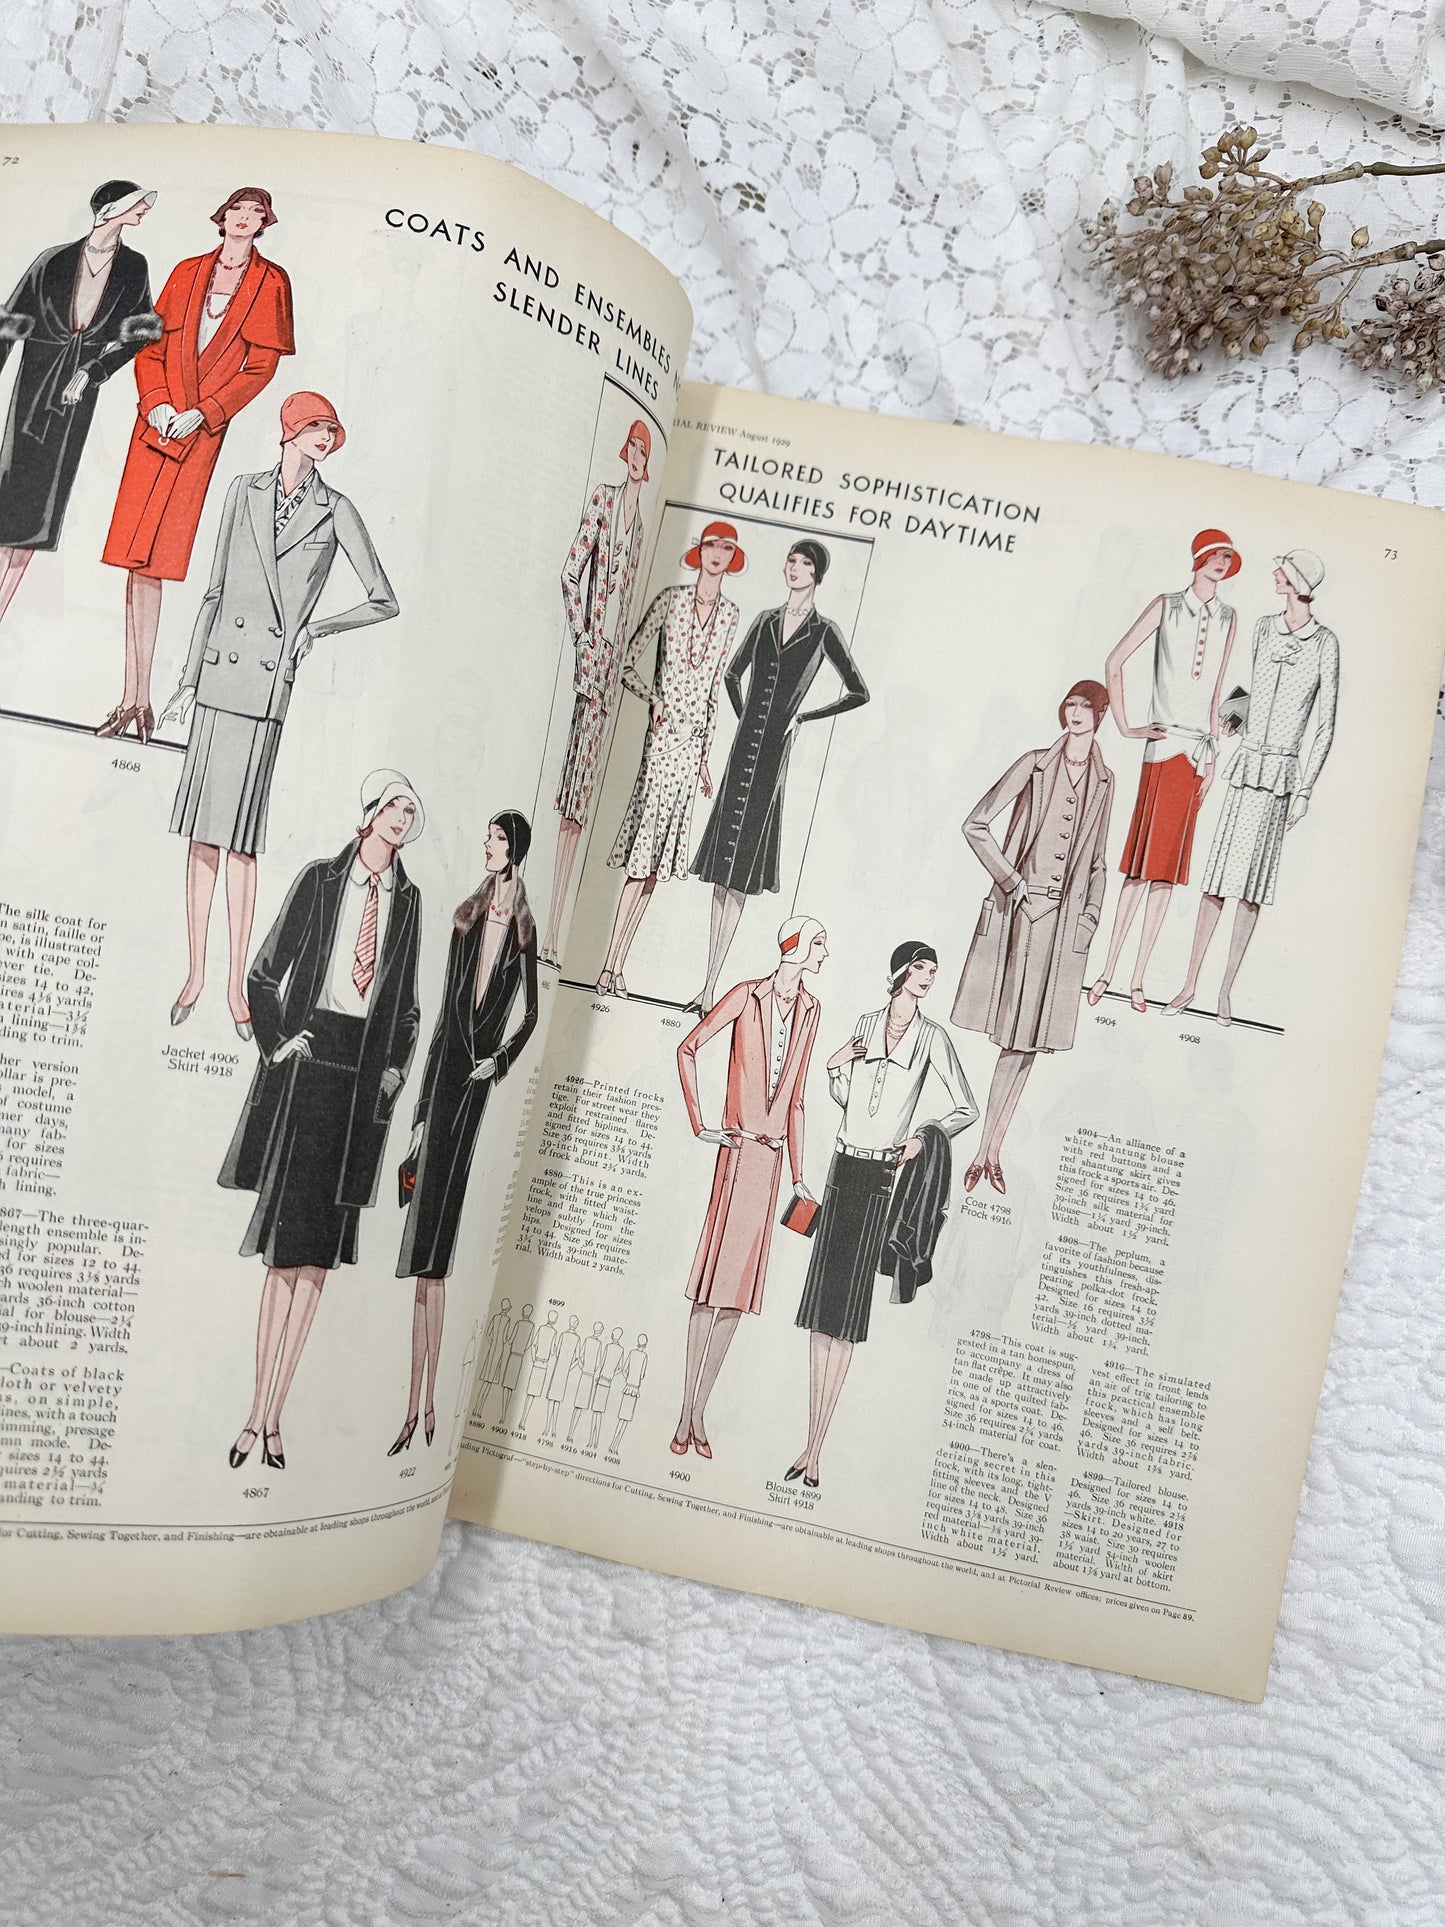 1929 Pictorial Review